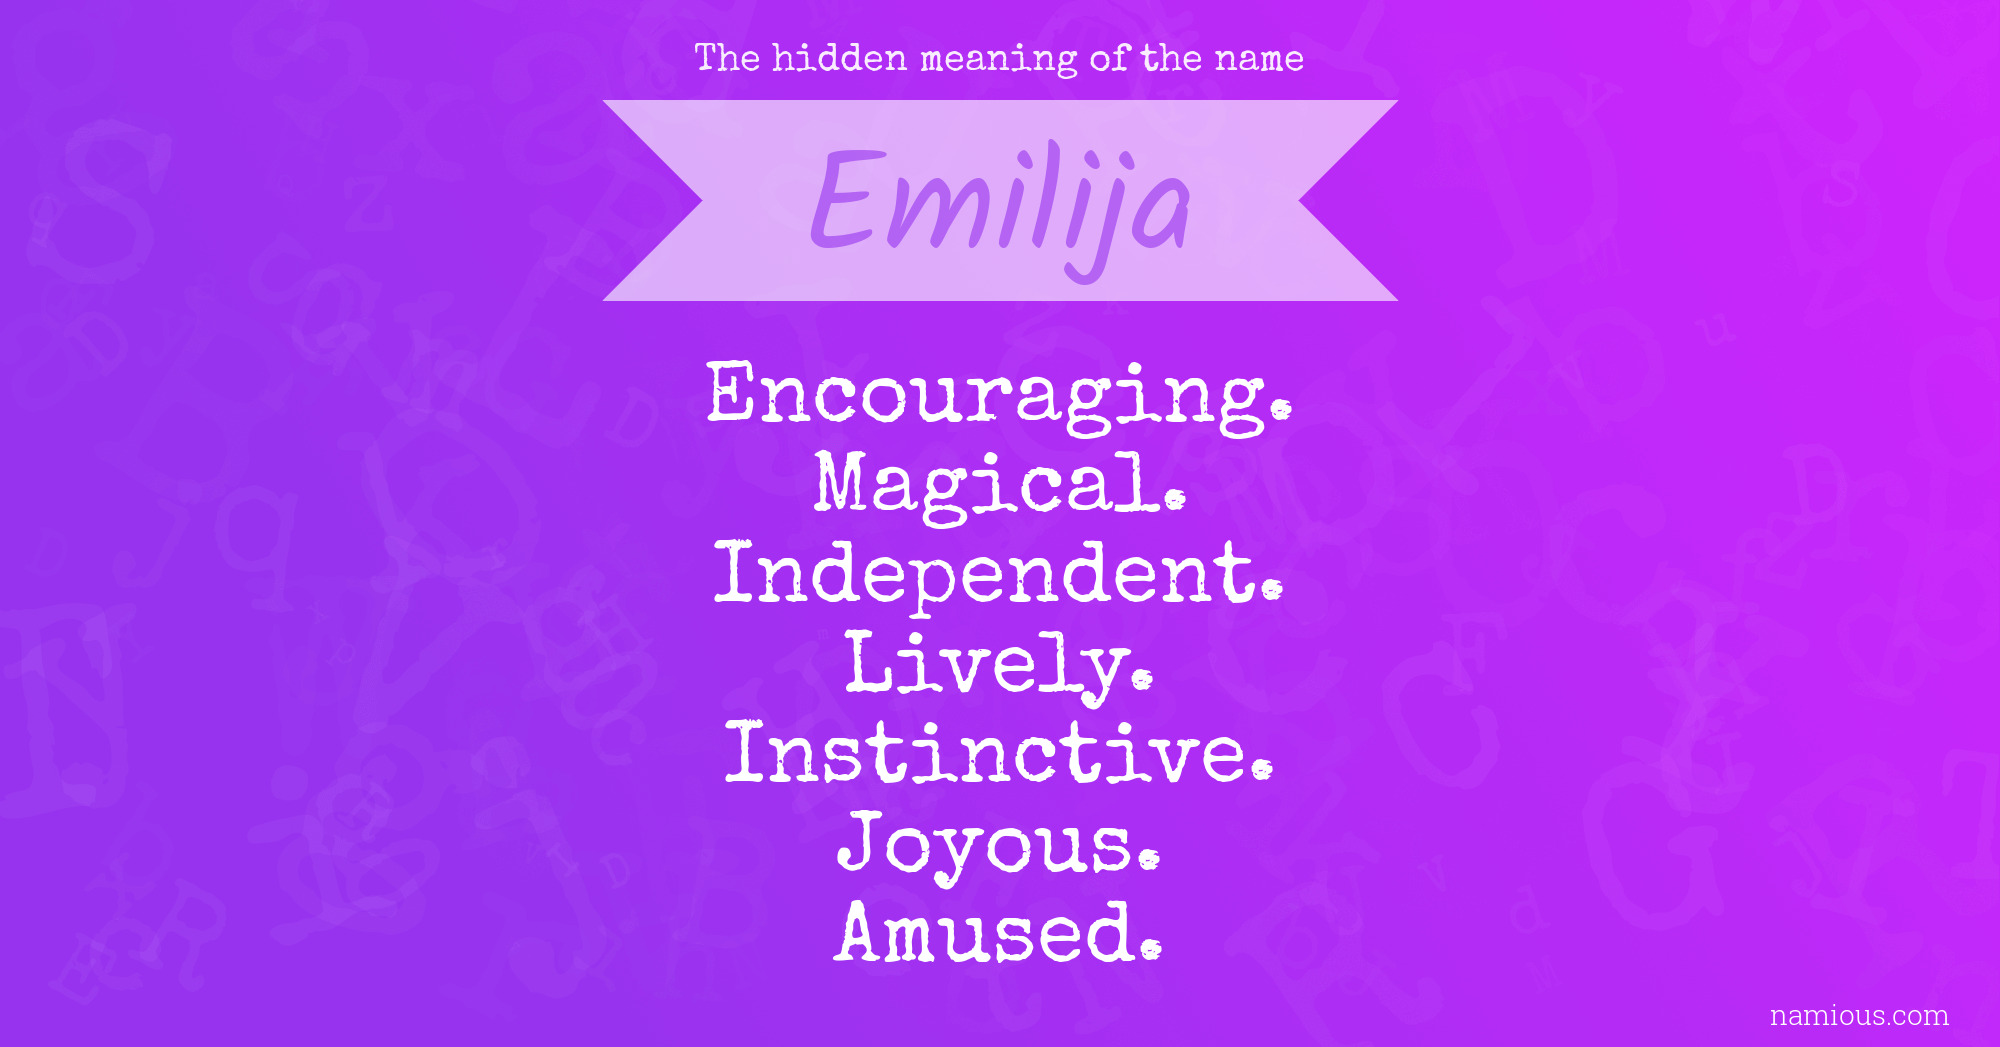 The hidden meaning of the name Emilija